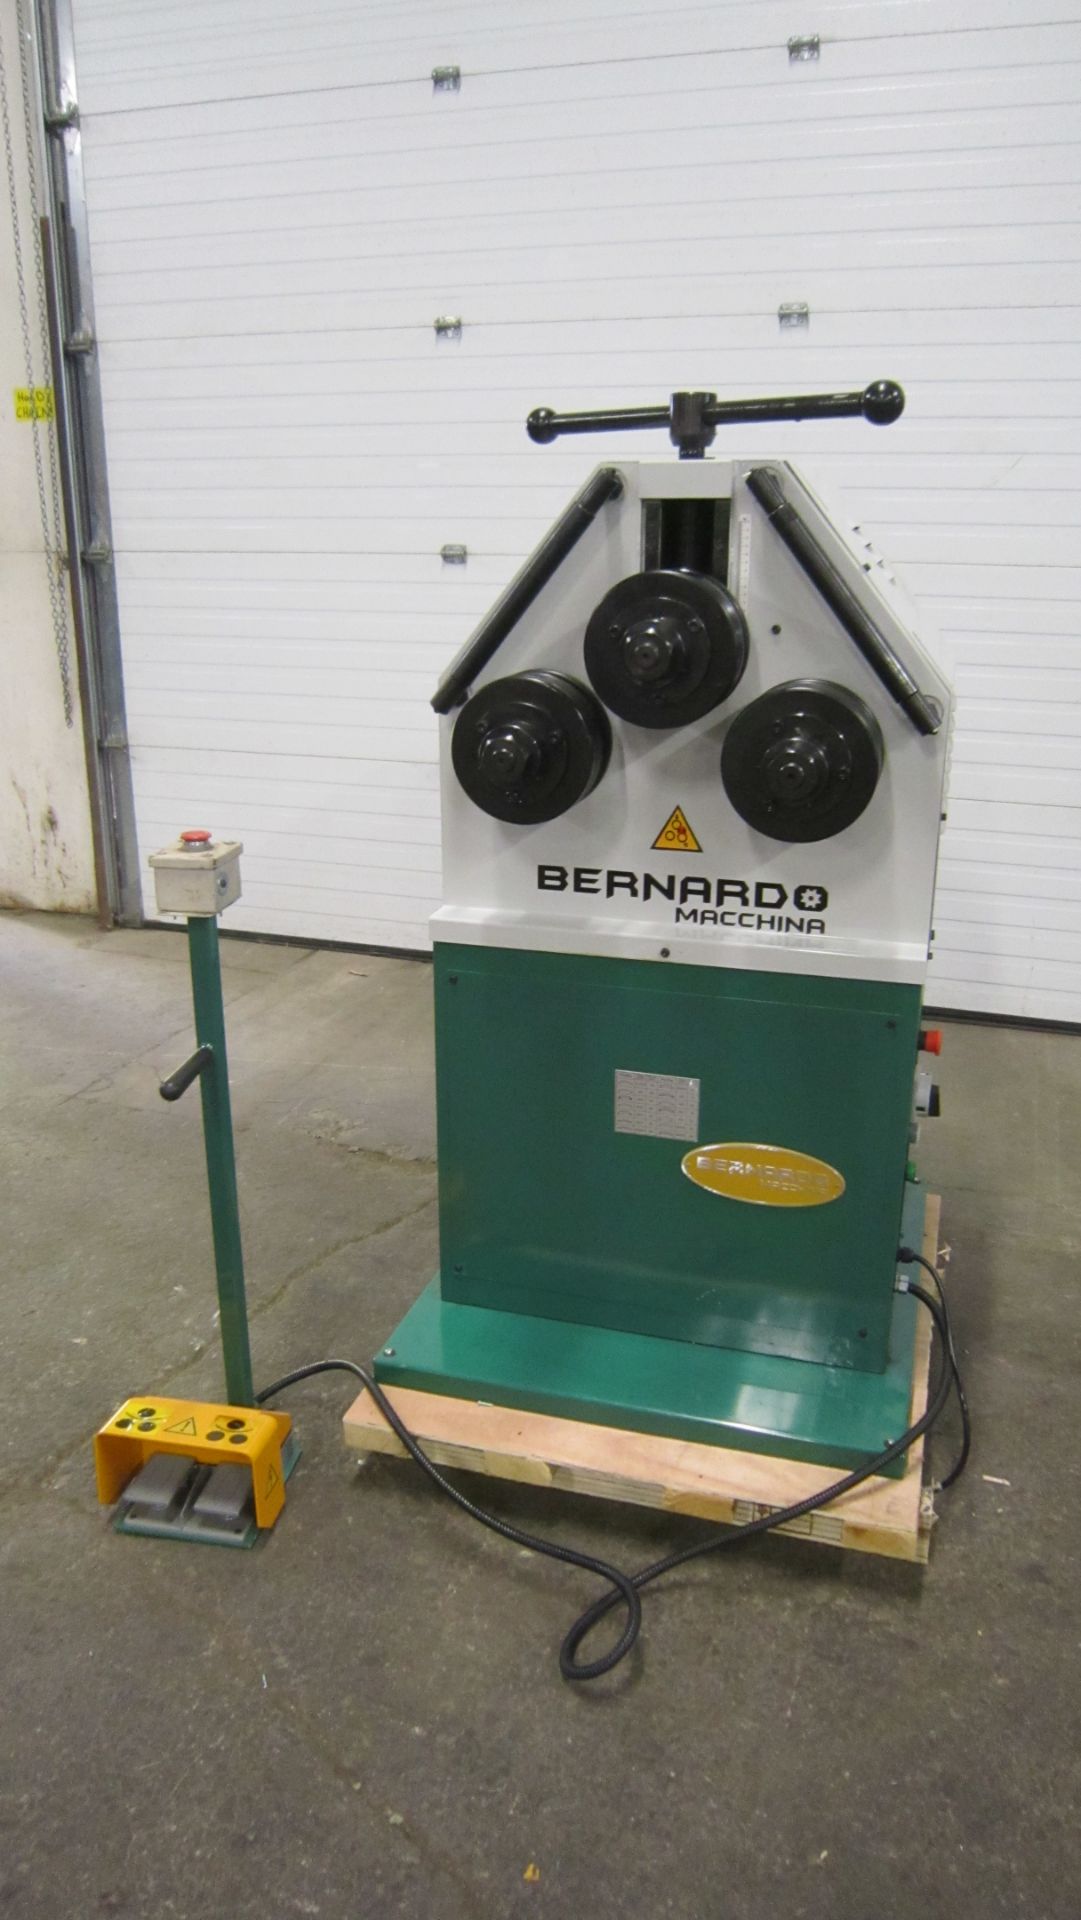 Bernardo Pyramid Angle Rolls - Tube Bender - 220V 3 phase with foot pedal control - MINT / UNUSED - Image 2 of 2